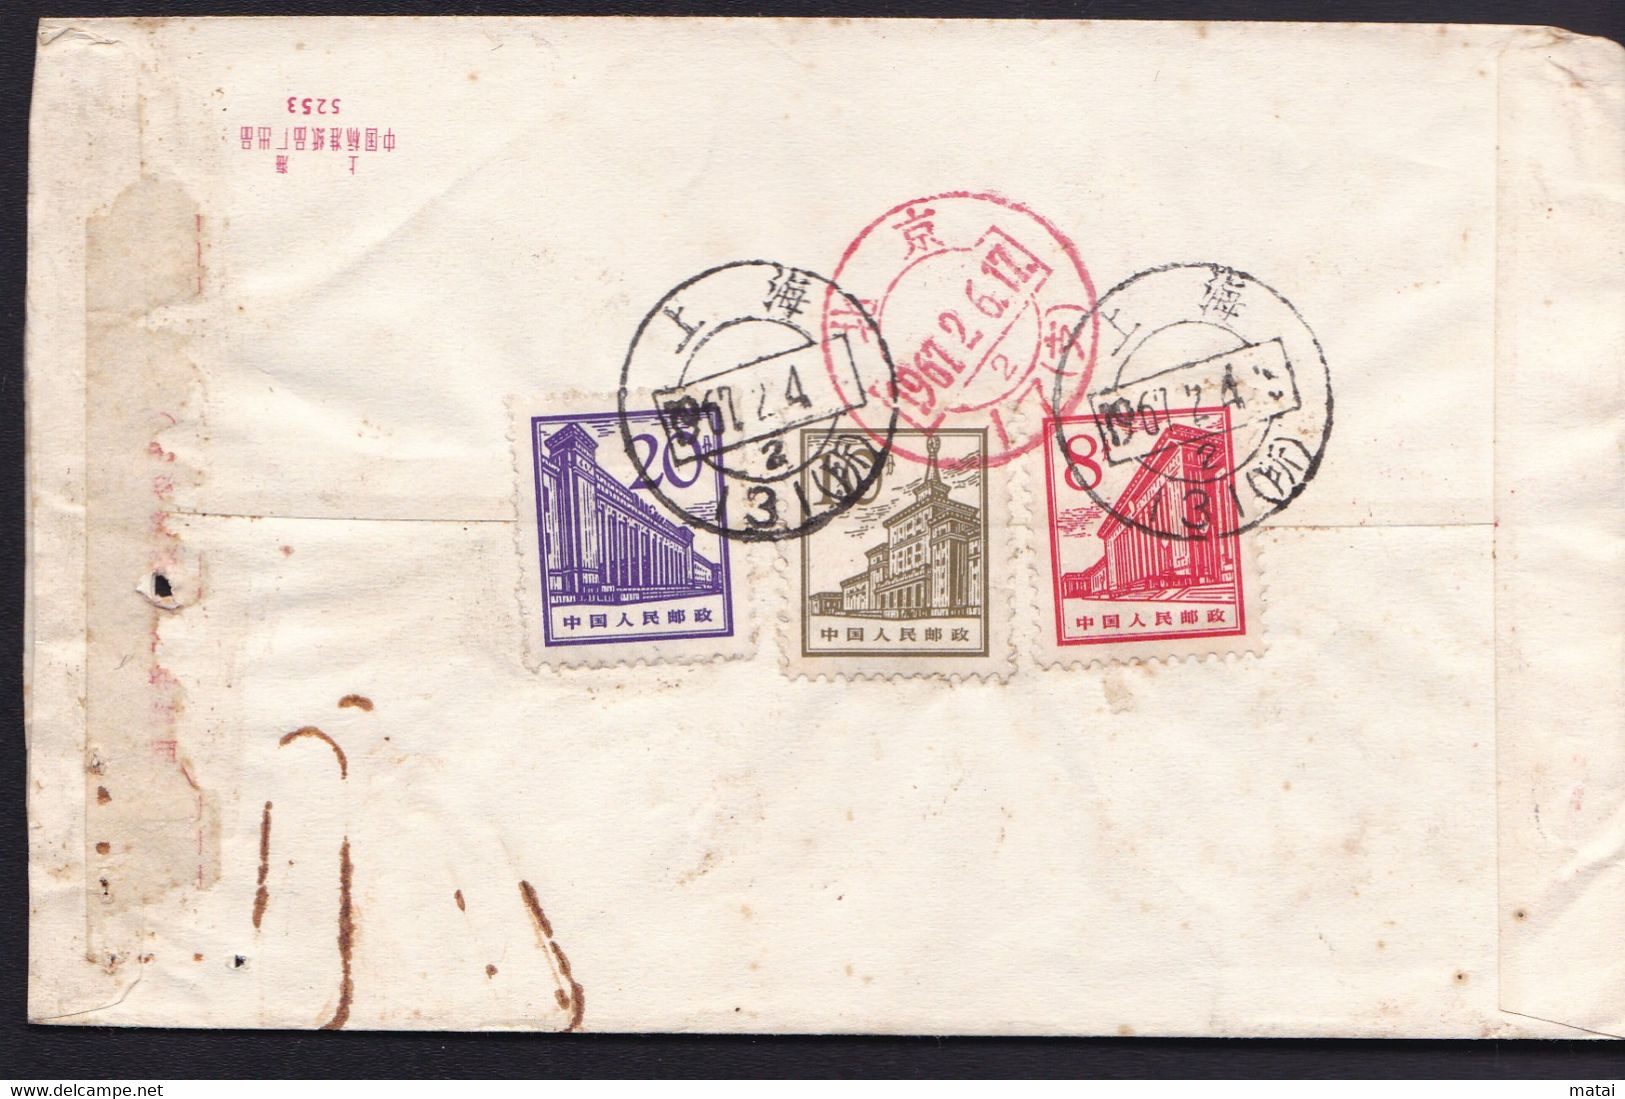 CHINA  CHINE 1967 SHANGHAI TO  Beijing State Council 北京 国务院 COVER 挂号 回执 Receipt Of Registration 0.08f +0.10f+0.20f  RARE - Briefe U. Dokumente